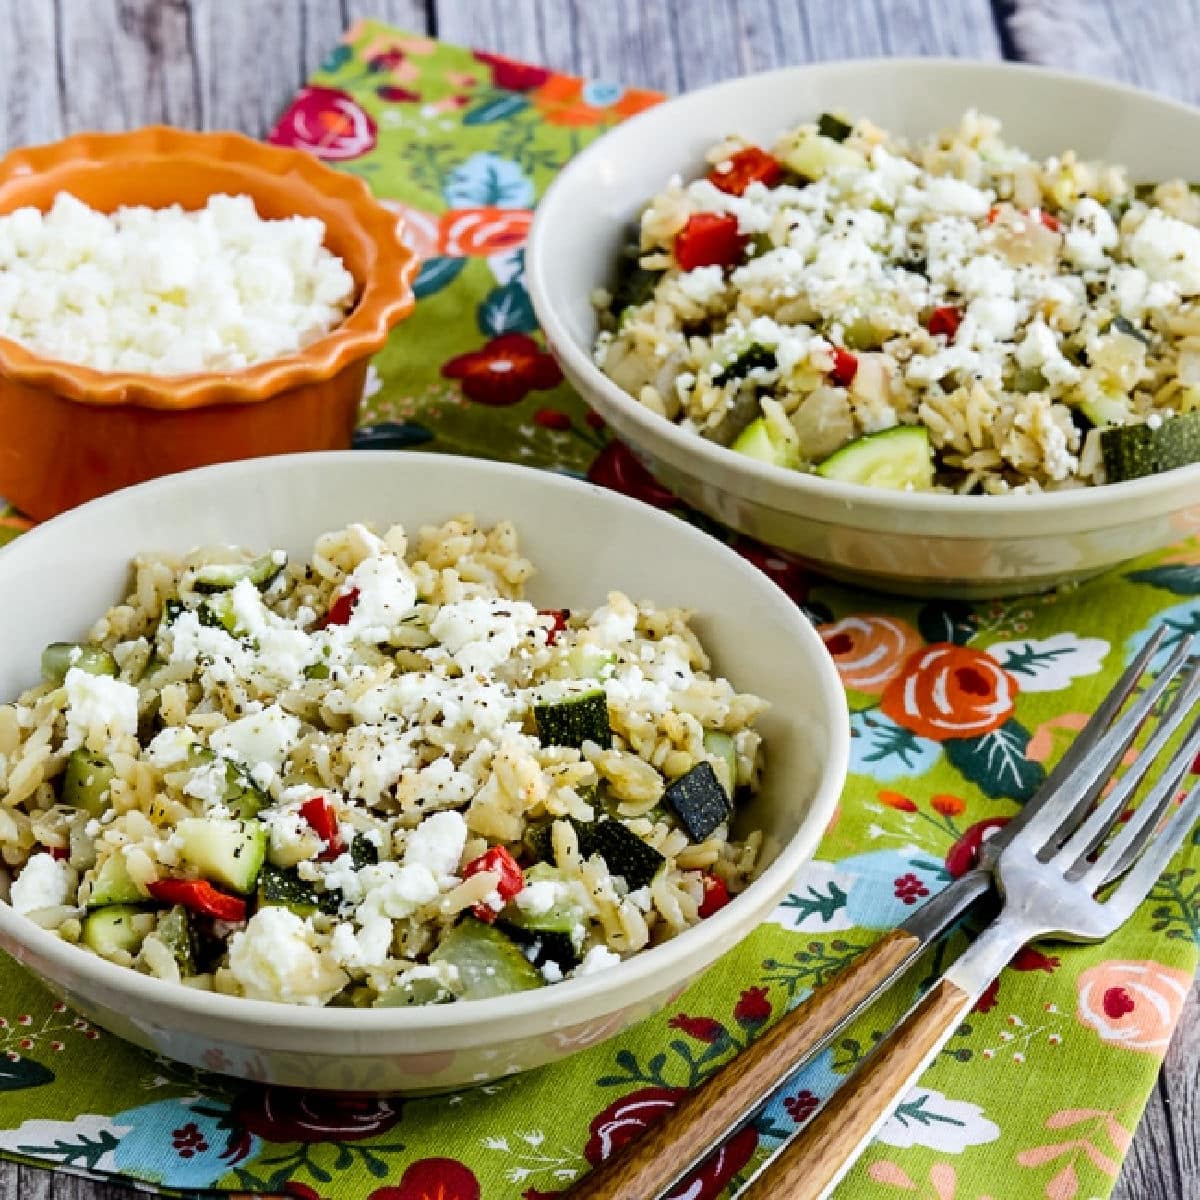 Square image of Slow Cooker Brown Rice with Veggies and Feta shown in two serving bowls.